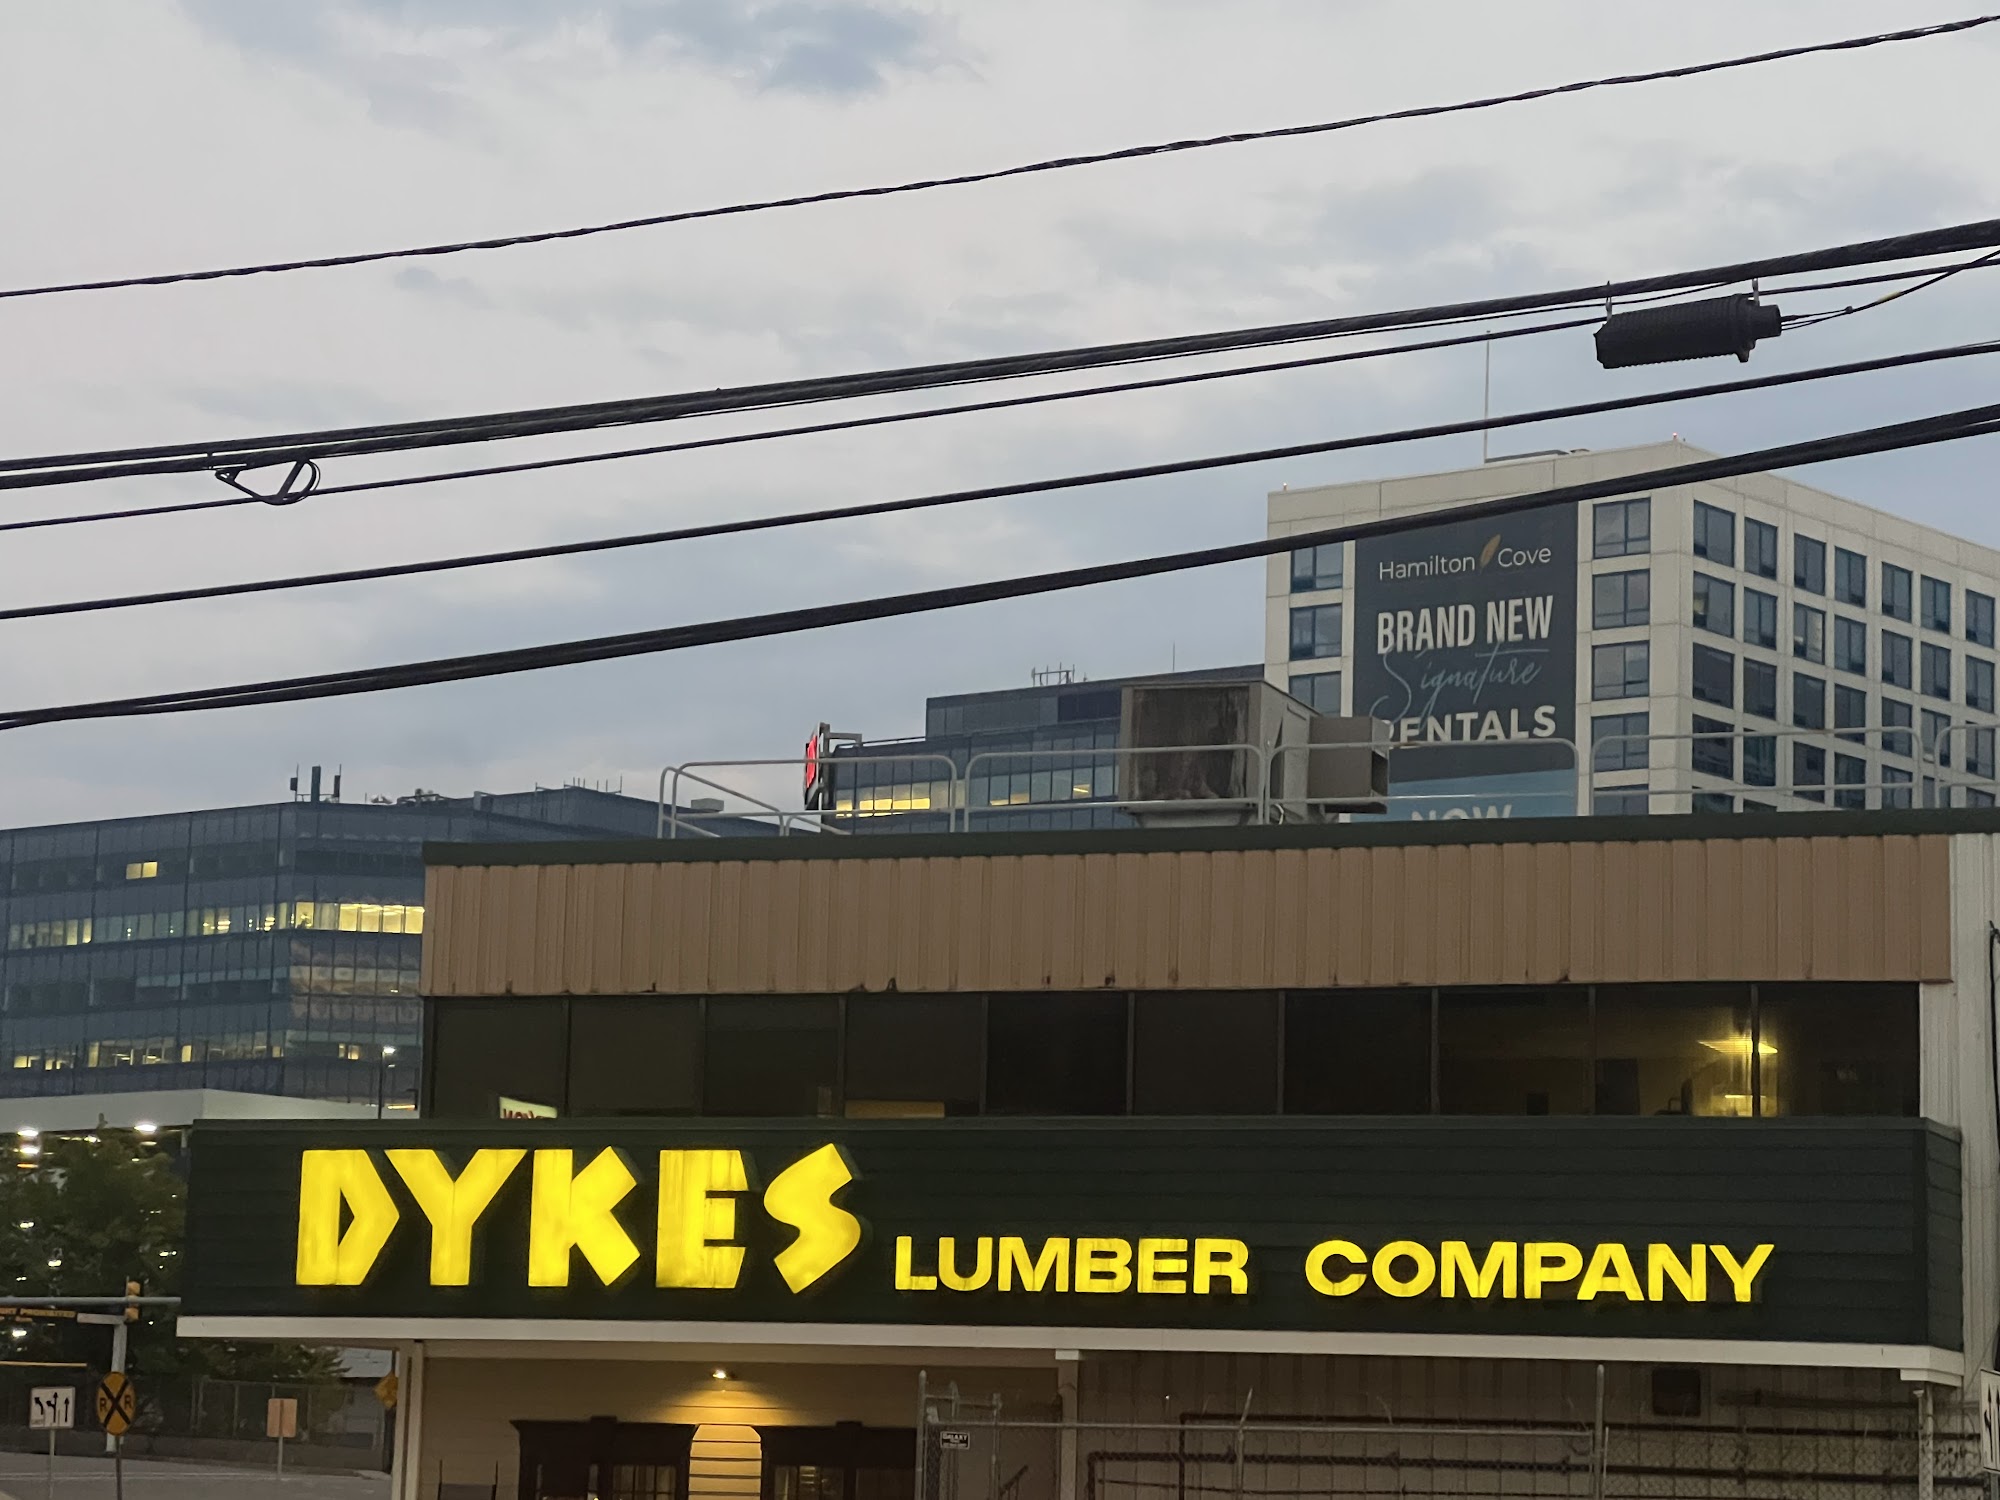 Dykes Lumber Company 1899 Park Ave, Weehawken New Jersey 07086